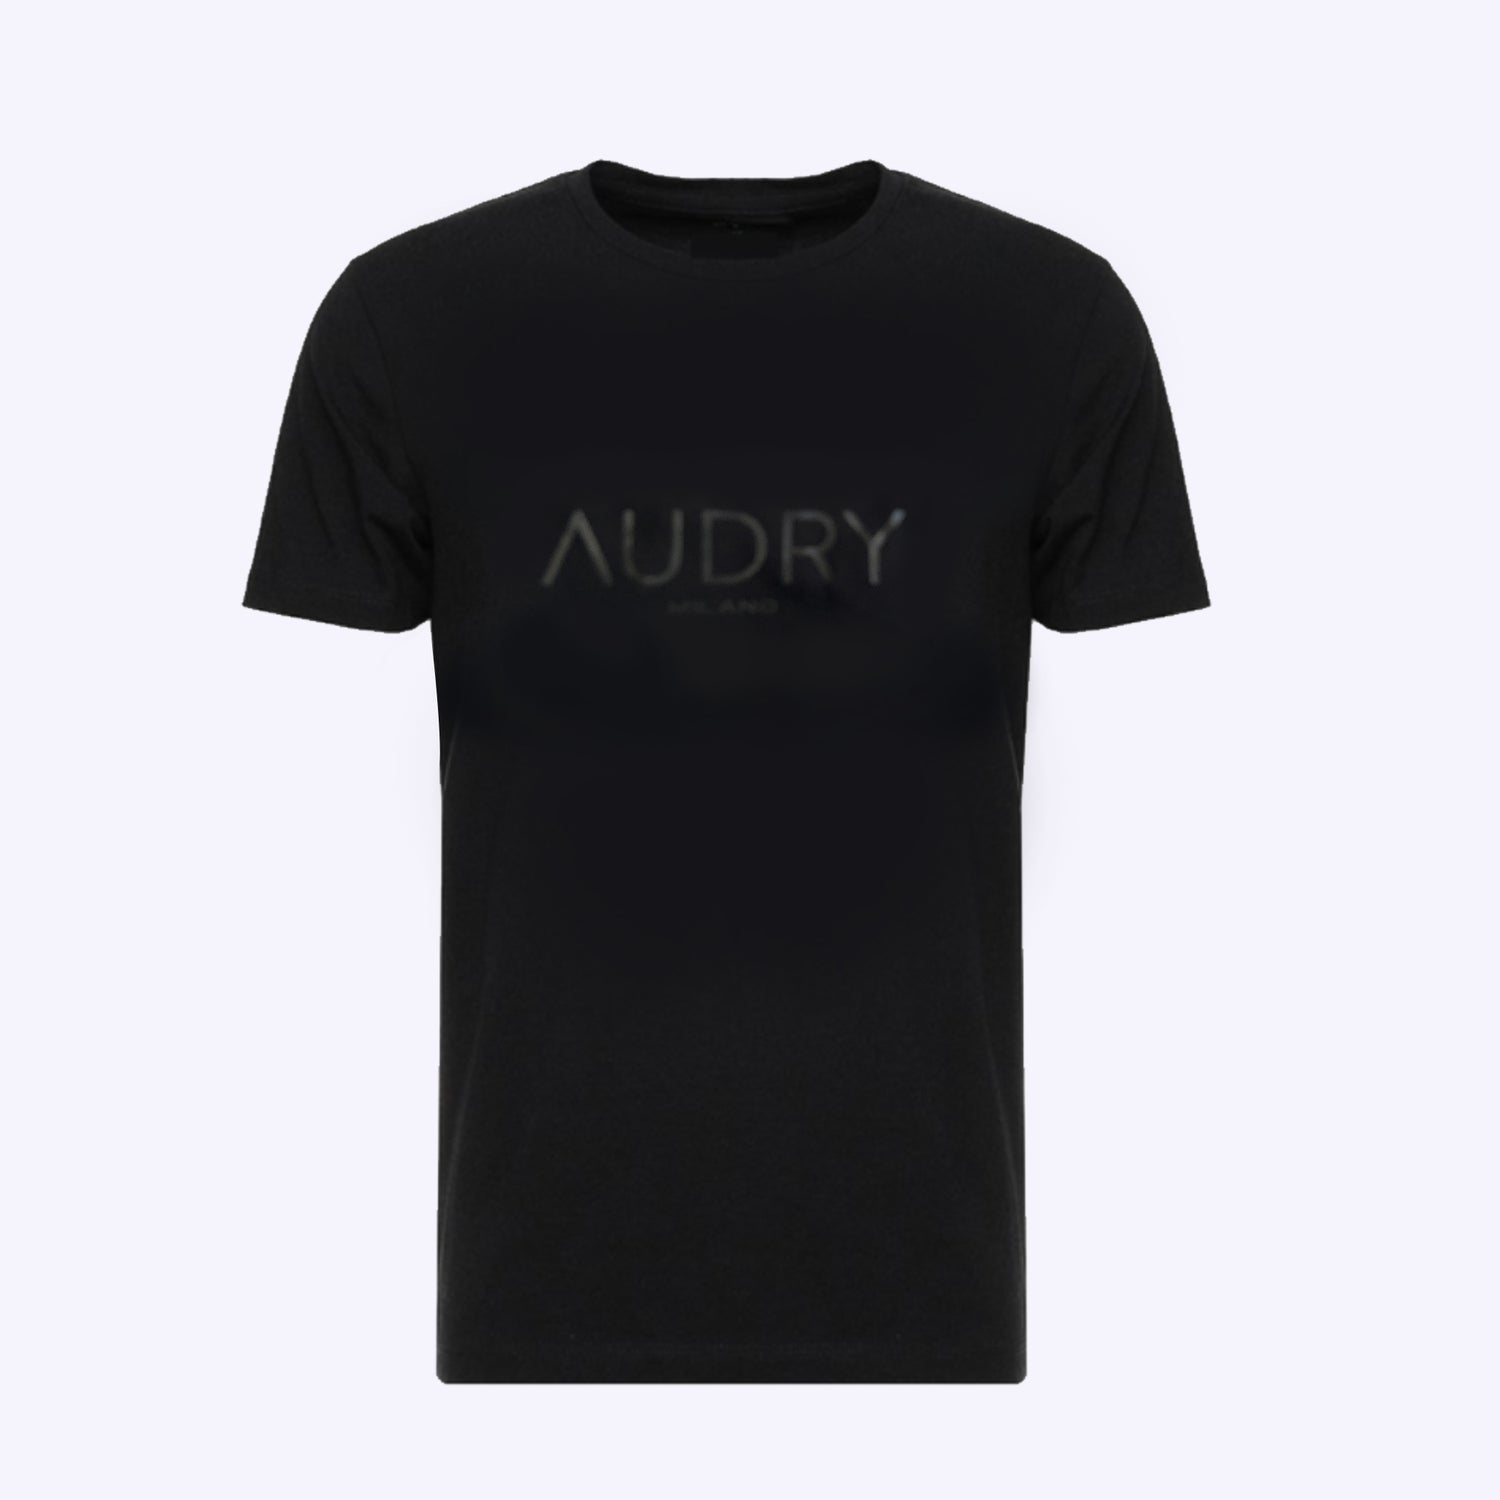 T-Shirt Audry